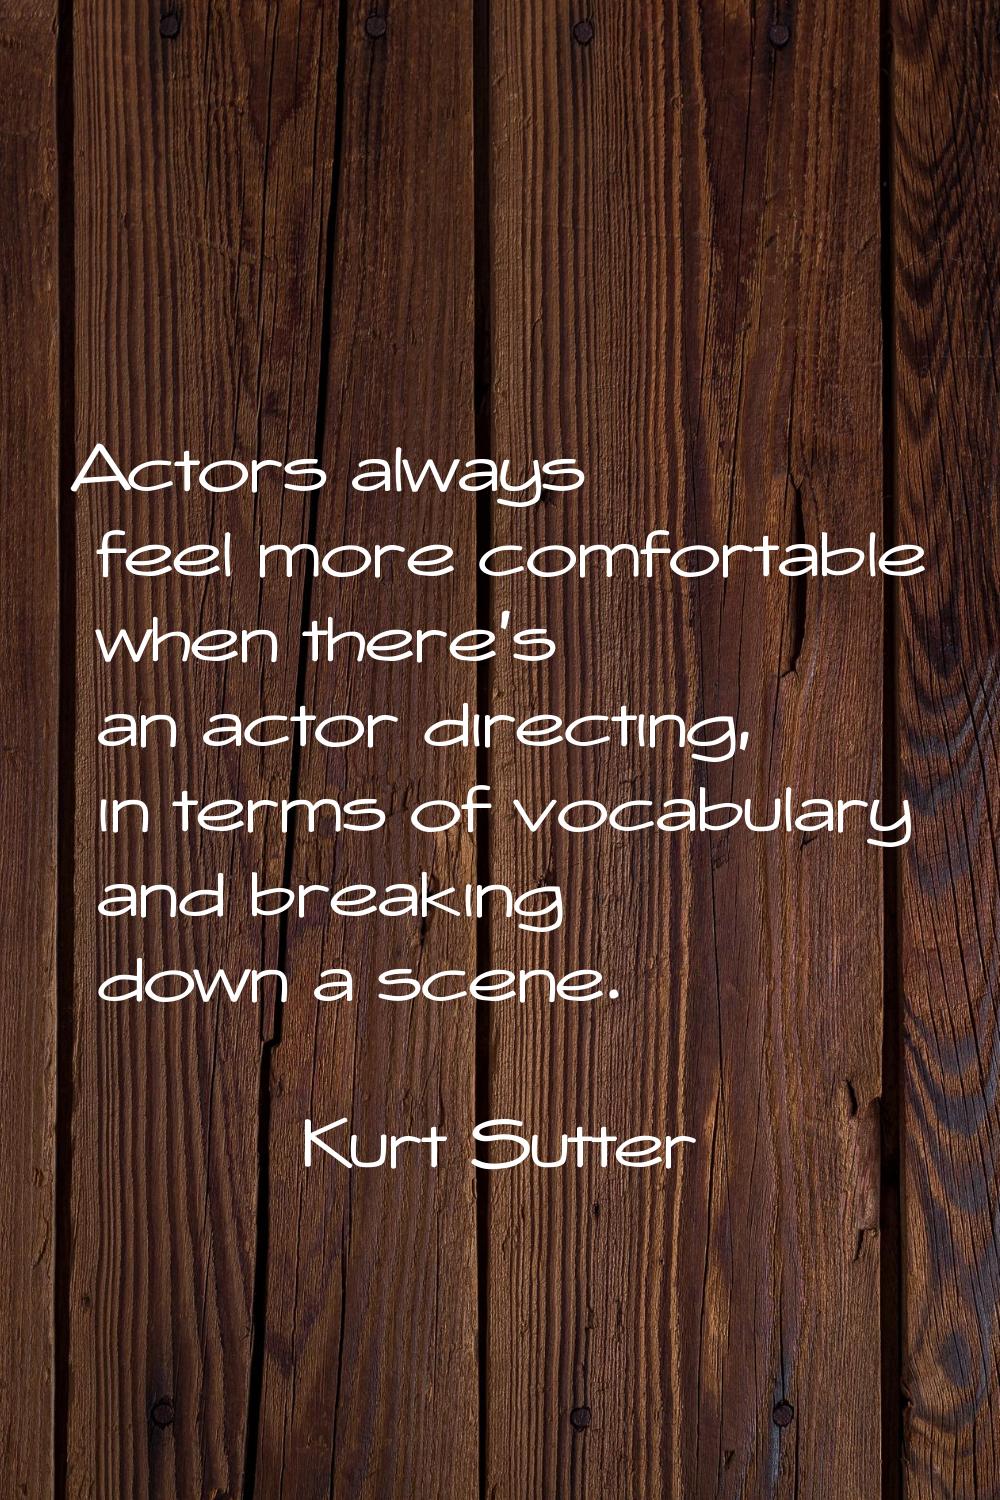 Actors always feel more comfortable when there's an actor directing, in terms of vocabulary and bre